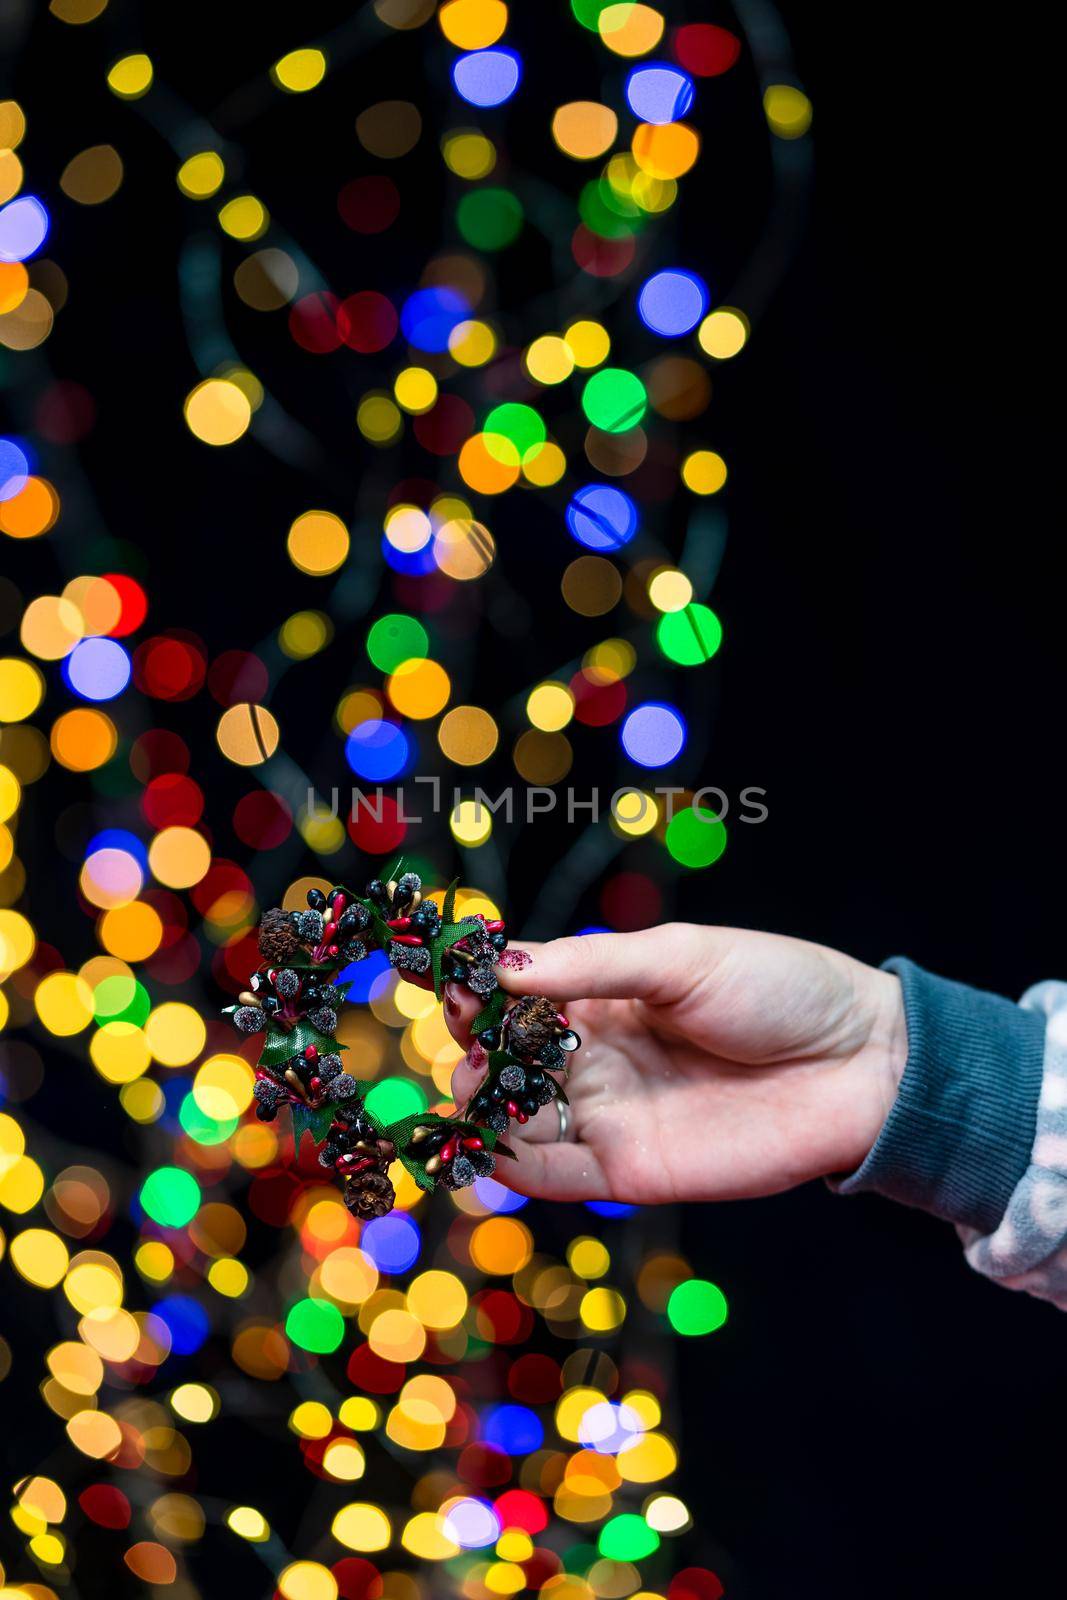 Woman's hands hold christmas decoration. Christmas and New Year holidays background, winter season with Christmas ornaments and blurred lights by vladispas